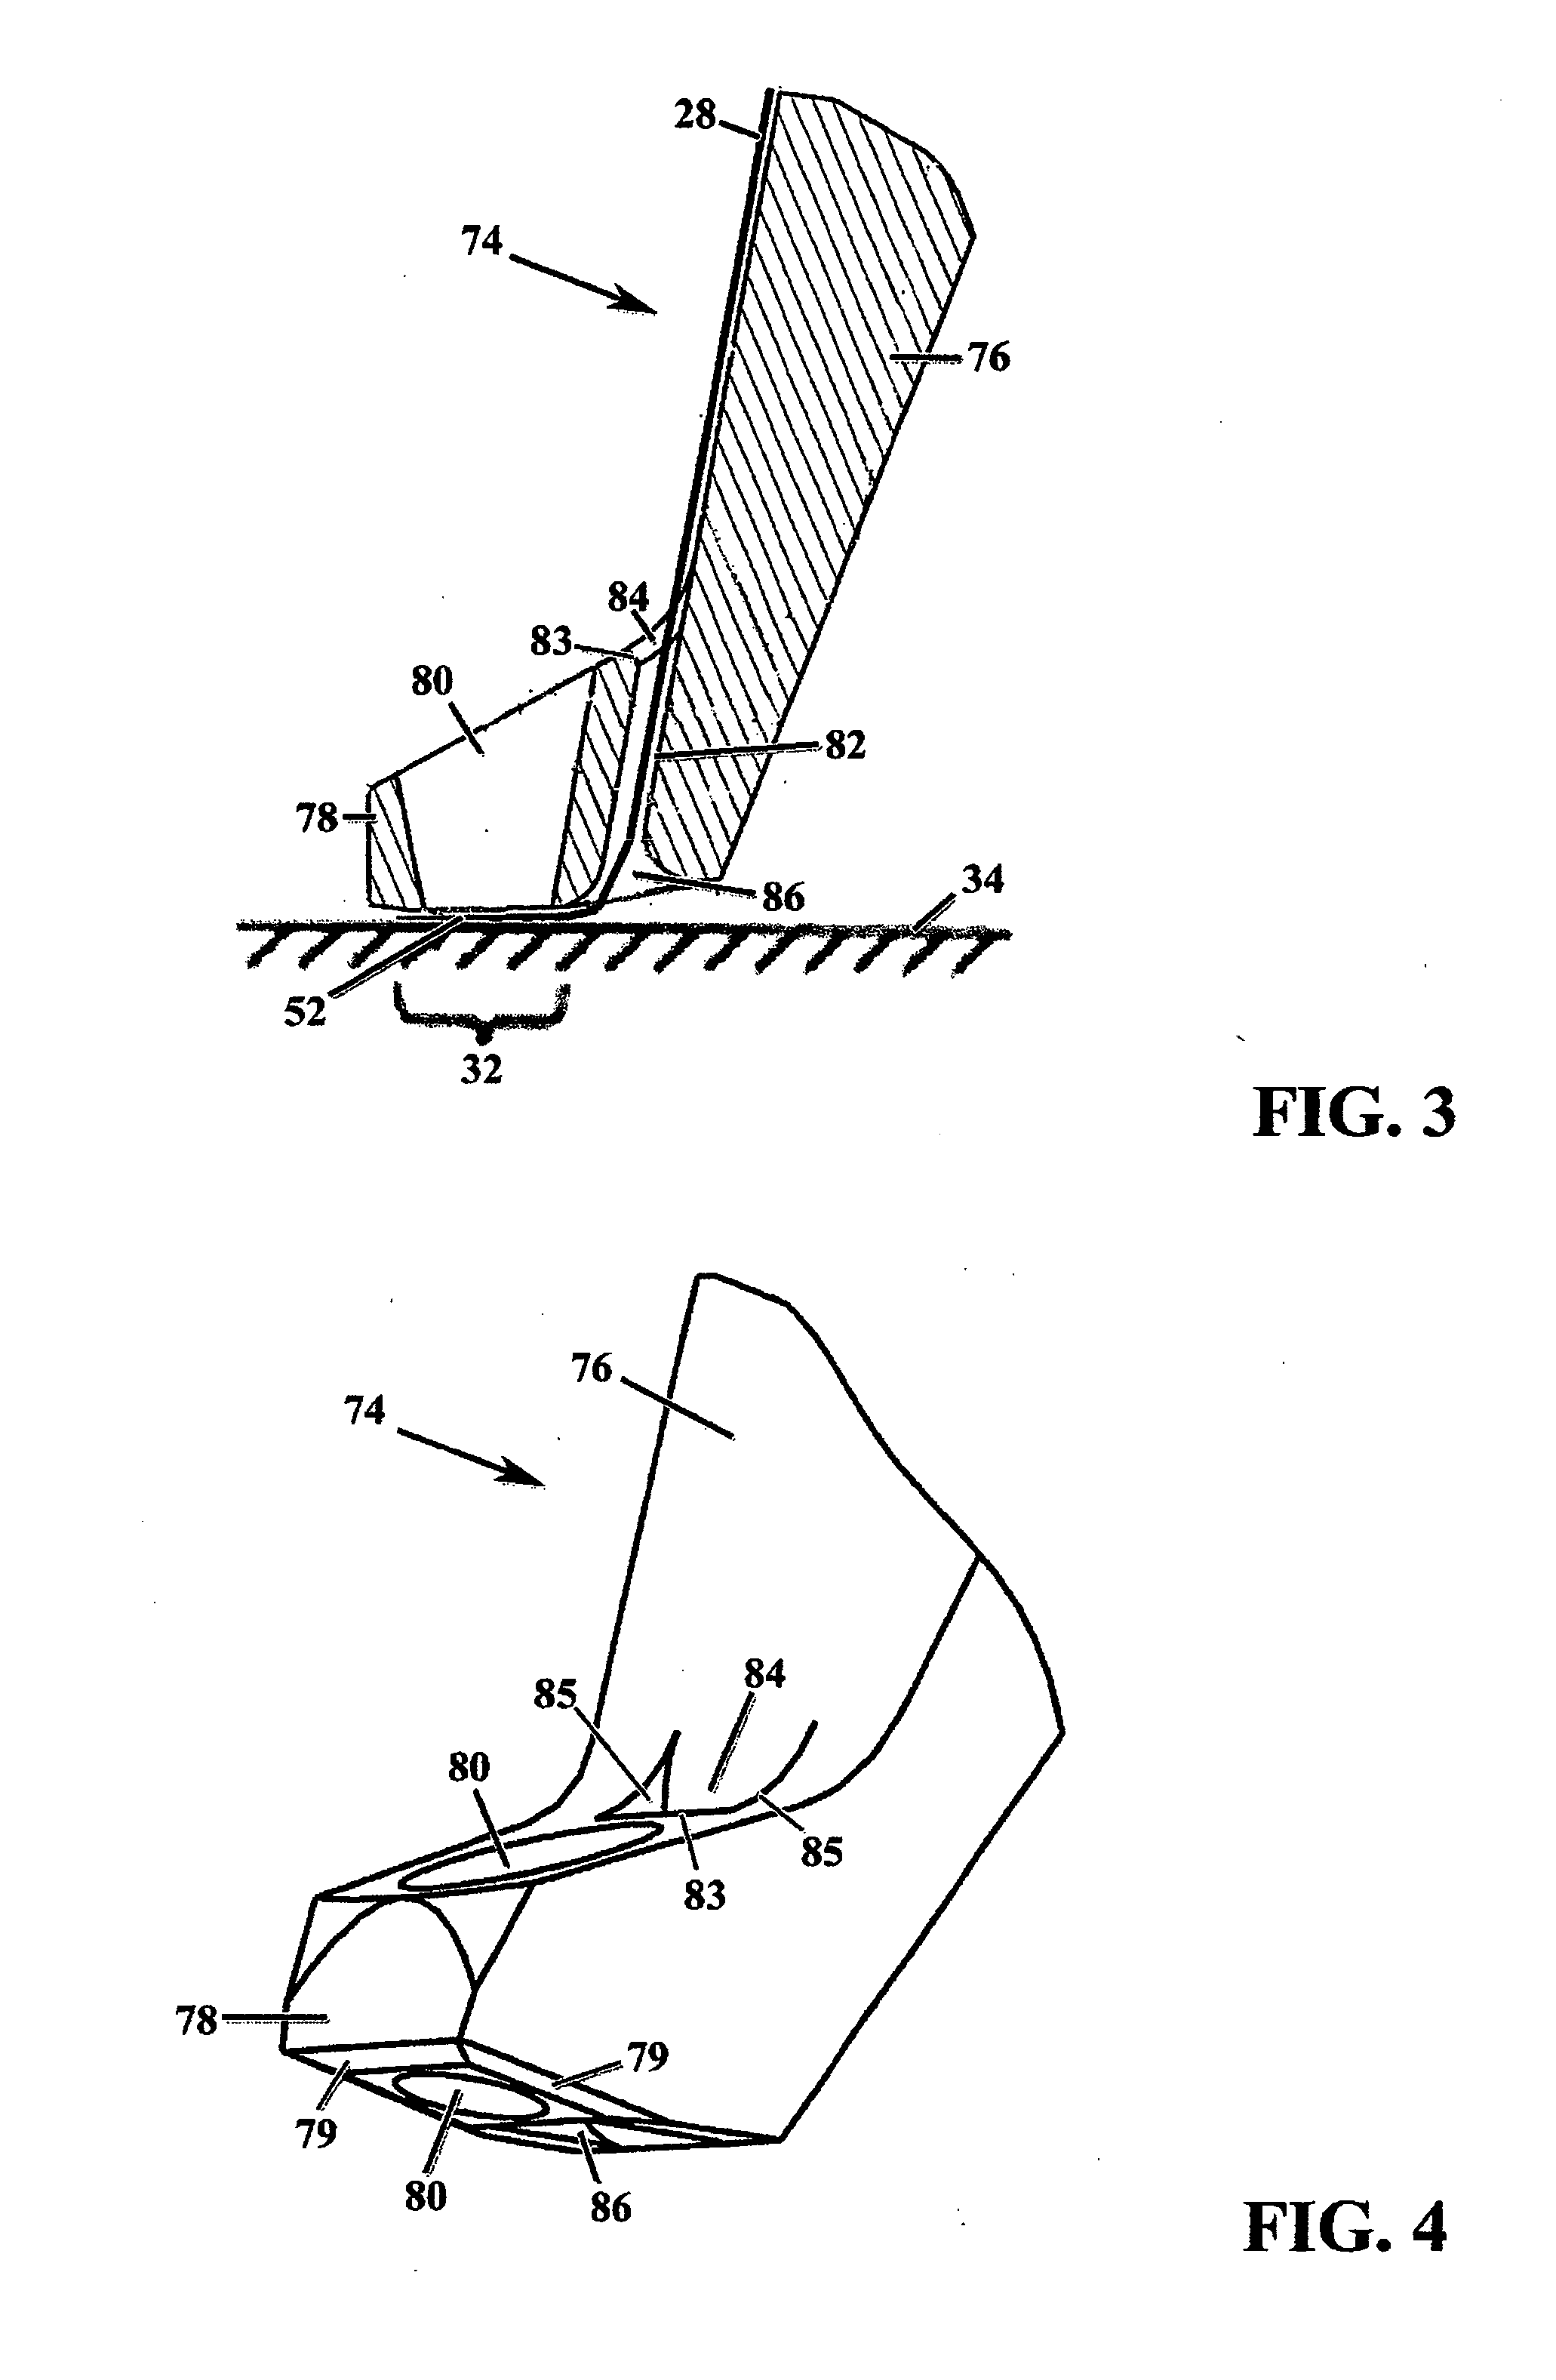 Laser bonding tool with improved bonding accuracy